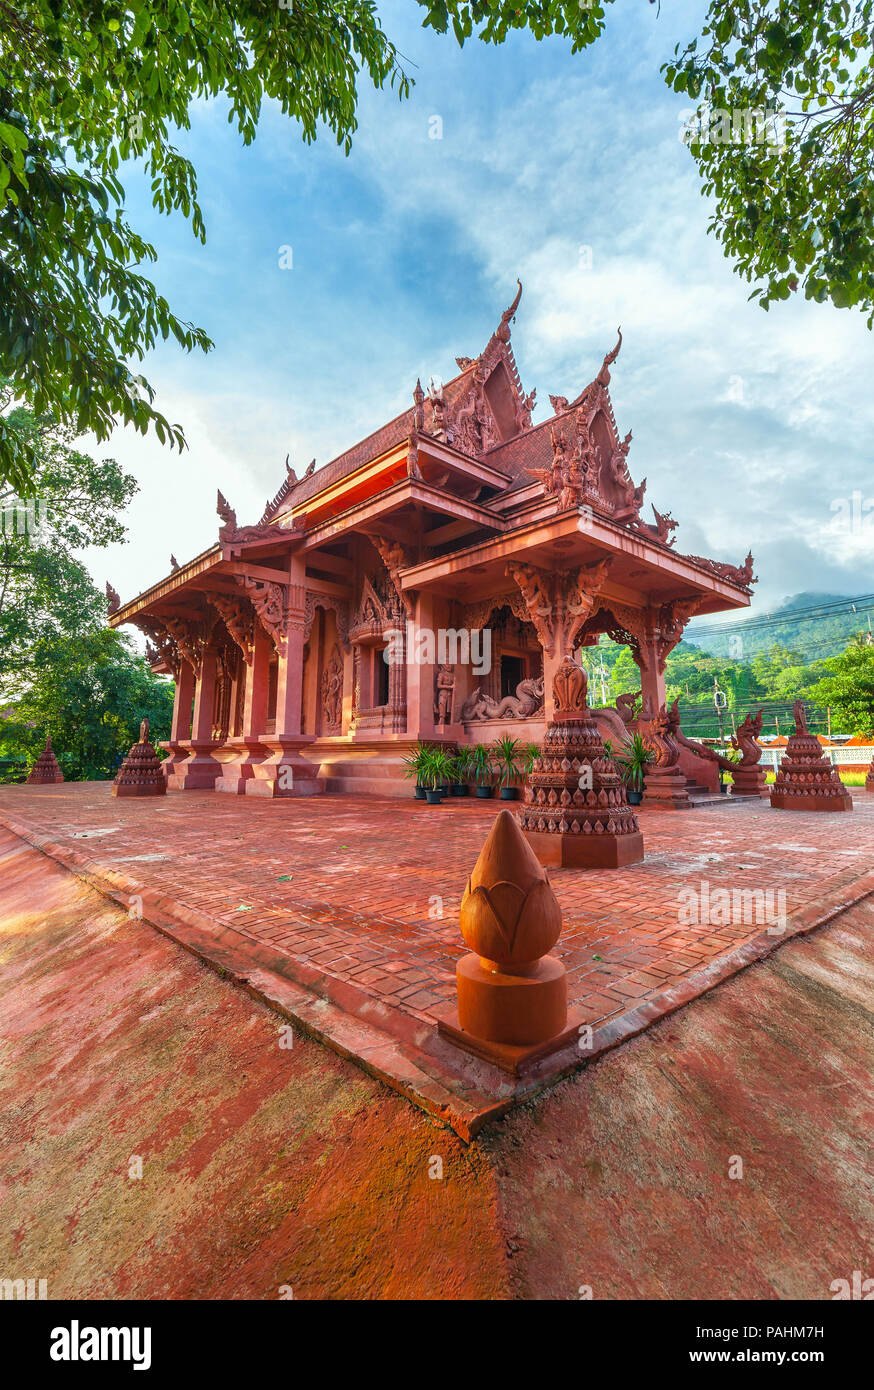 Terracotta temple Wat Sila Ngoo on Koh Samui in Thailand. Shooting with the wide angle lens. Stock Photo